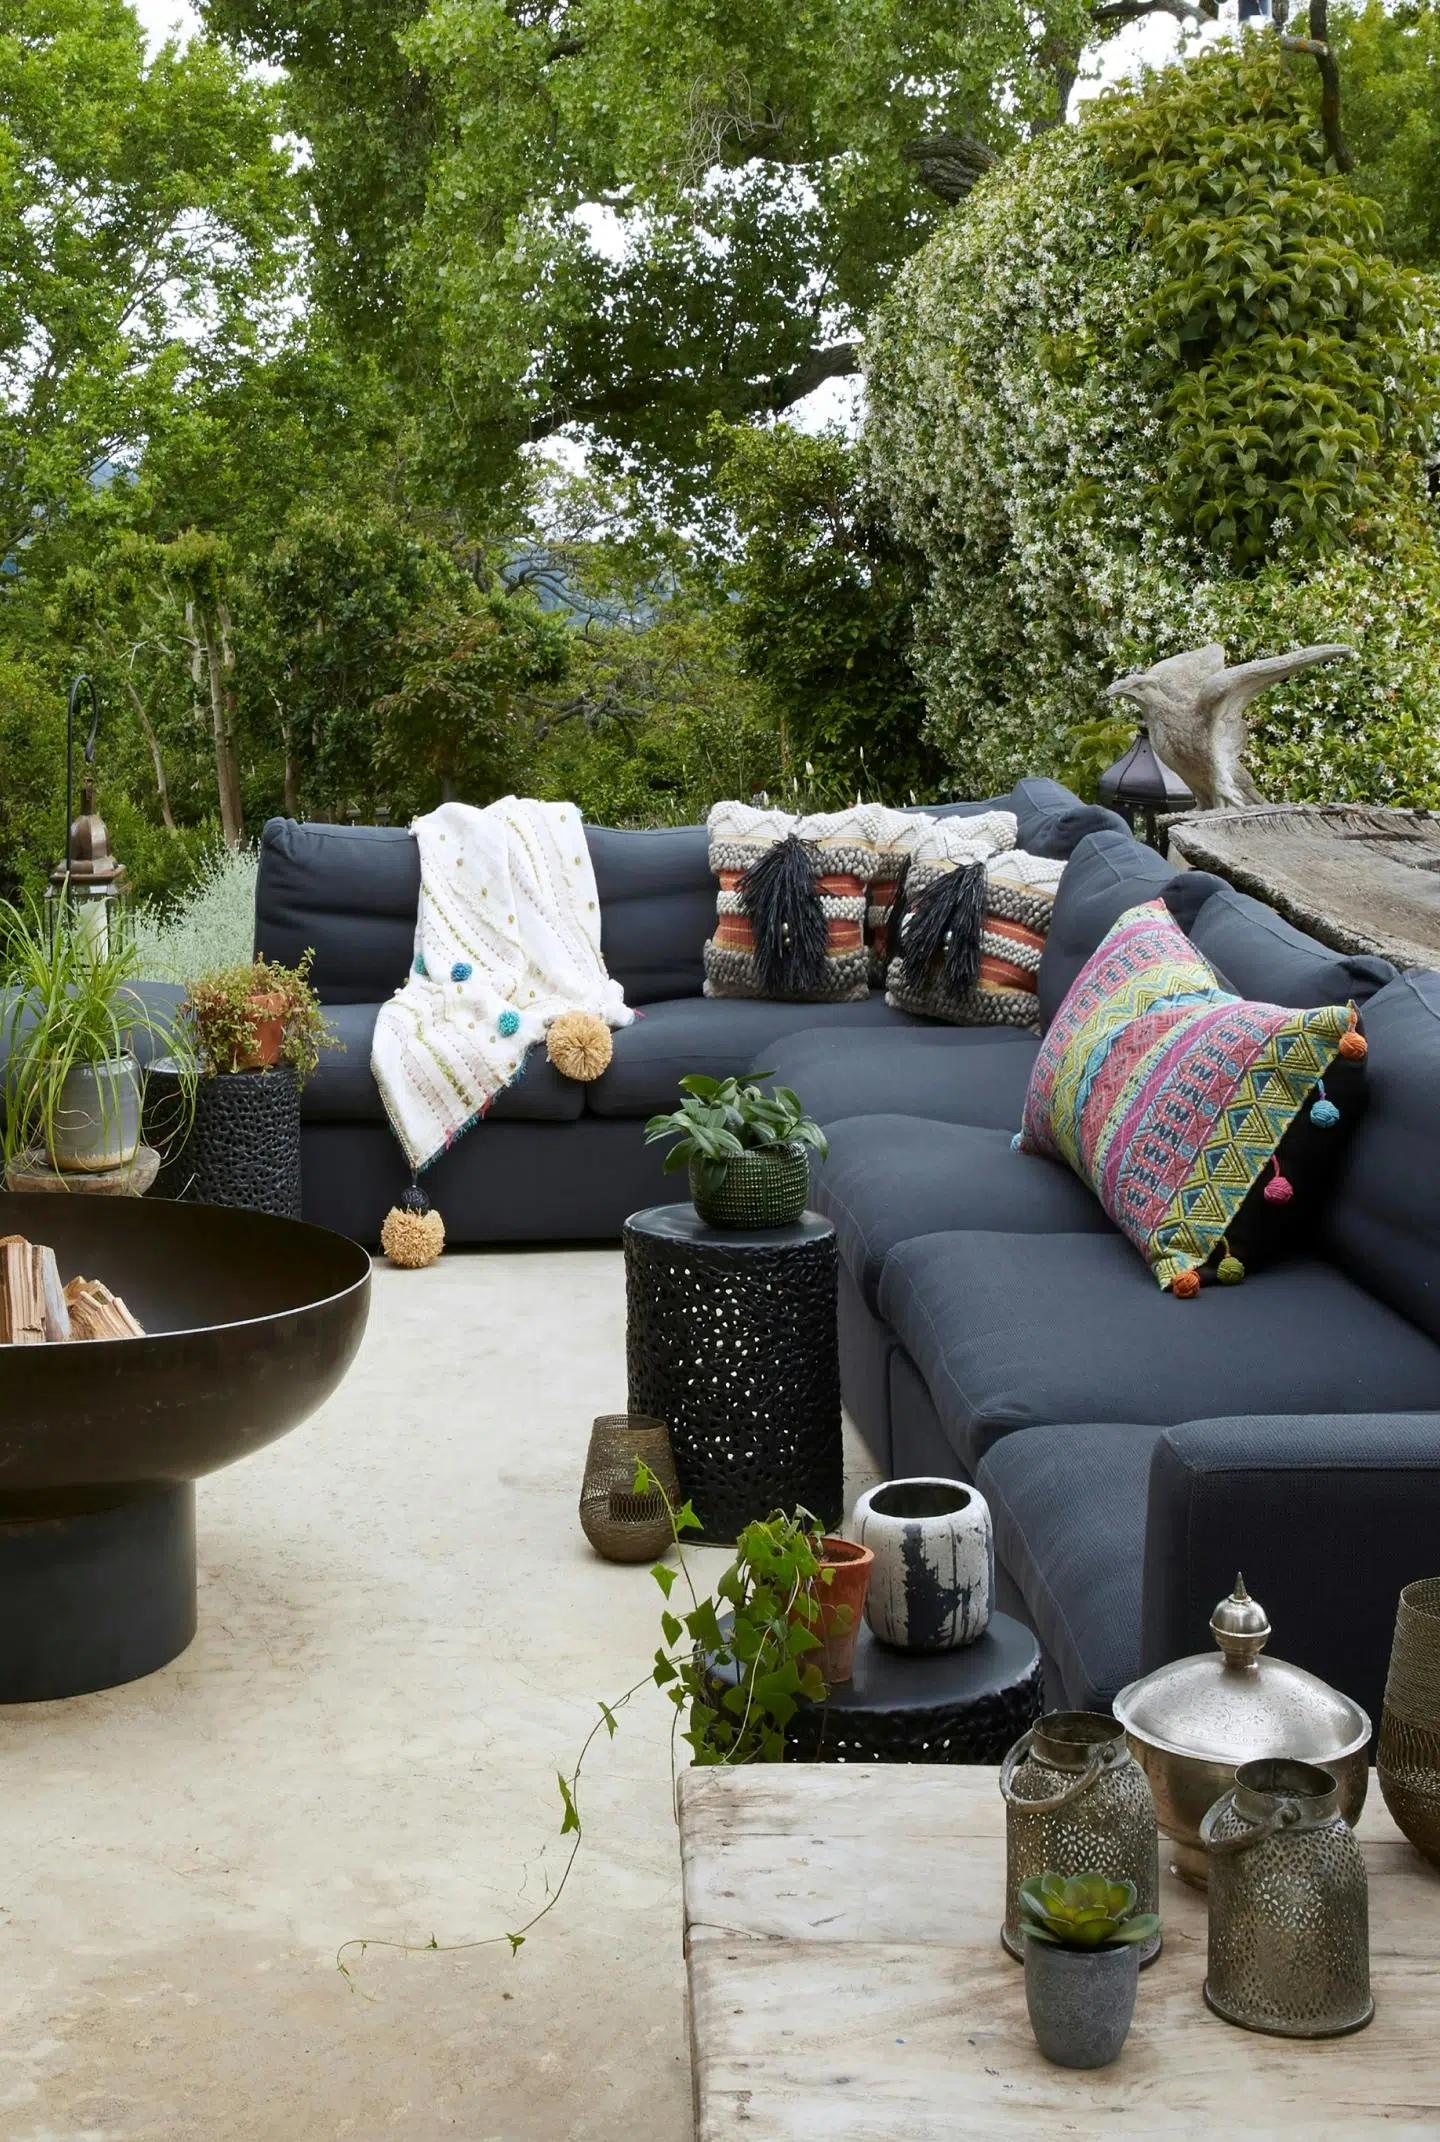 Close-up of an outdoor, Moroccan-inspired fire pit next do a charcoal outdoor sofa.